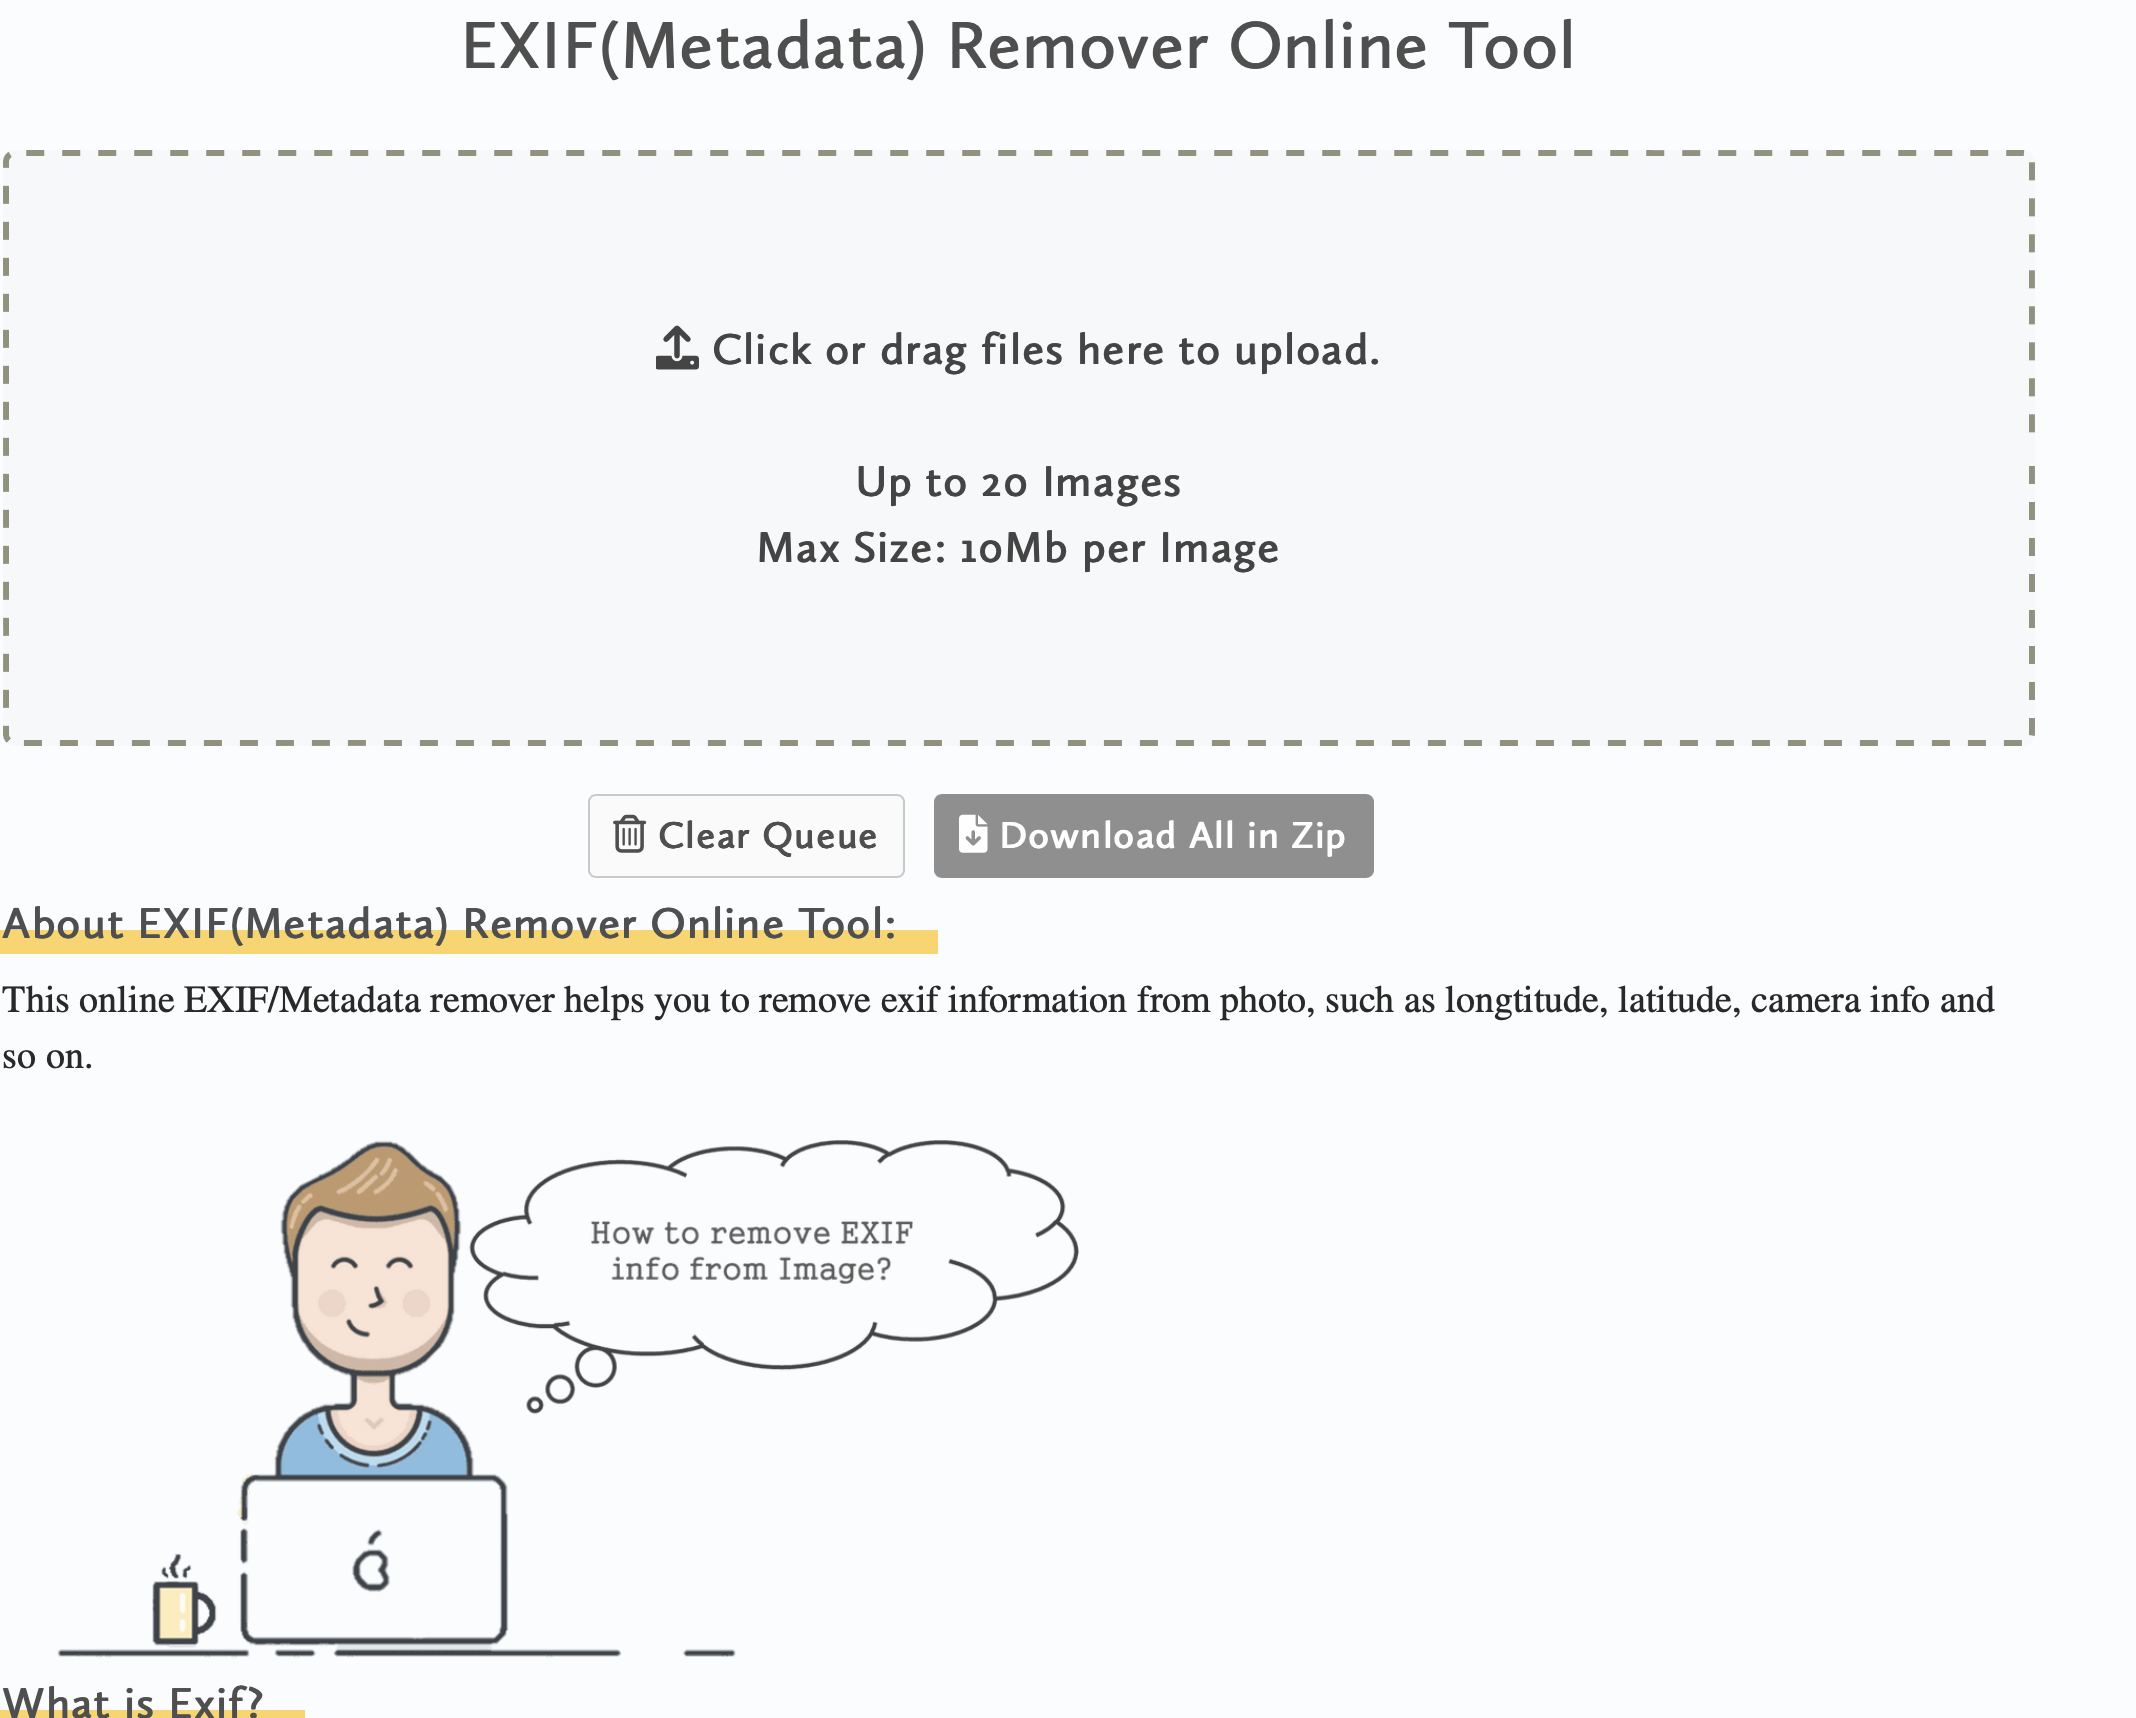 EXIF(Metadata) Remover Online Tool homepage, with the drag and top tool to purge the images metadata